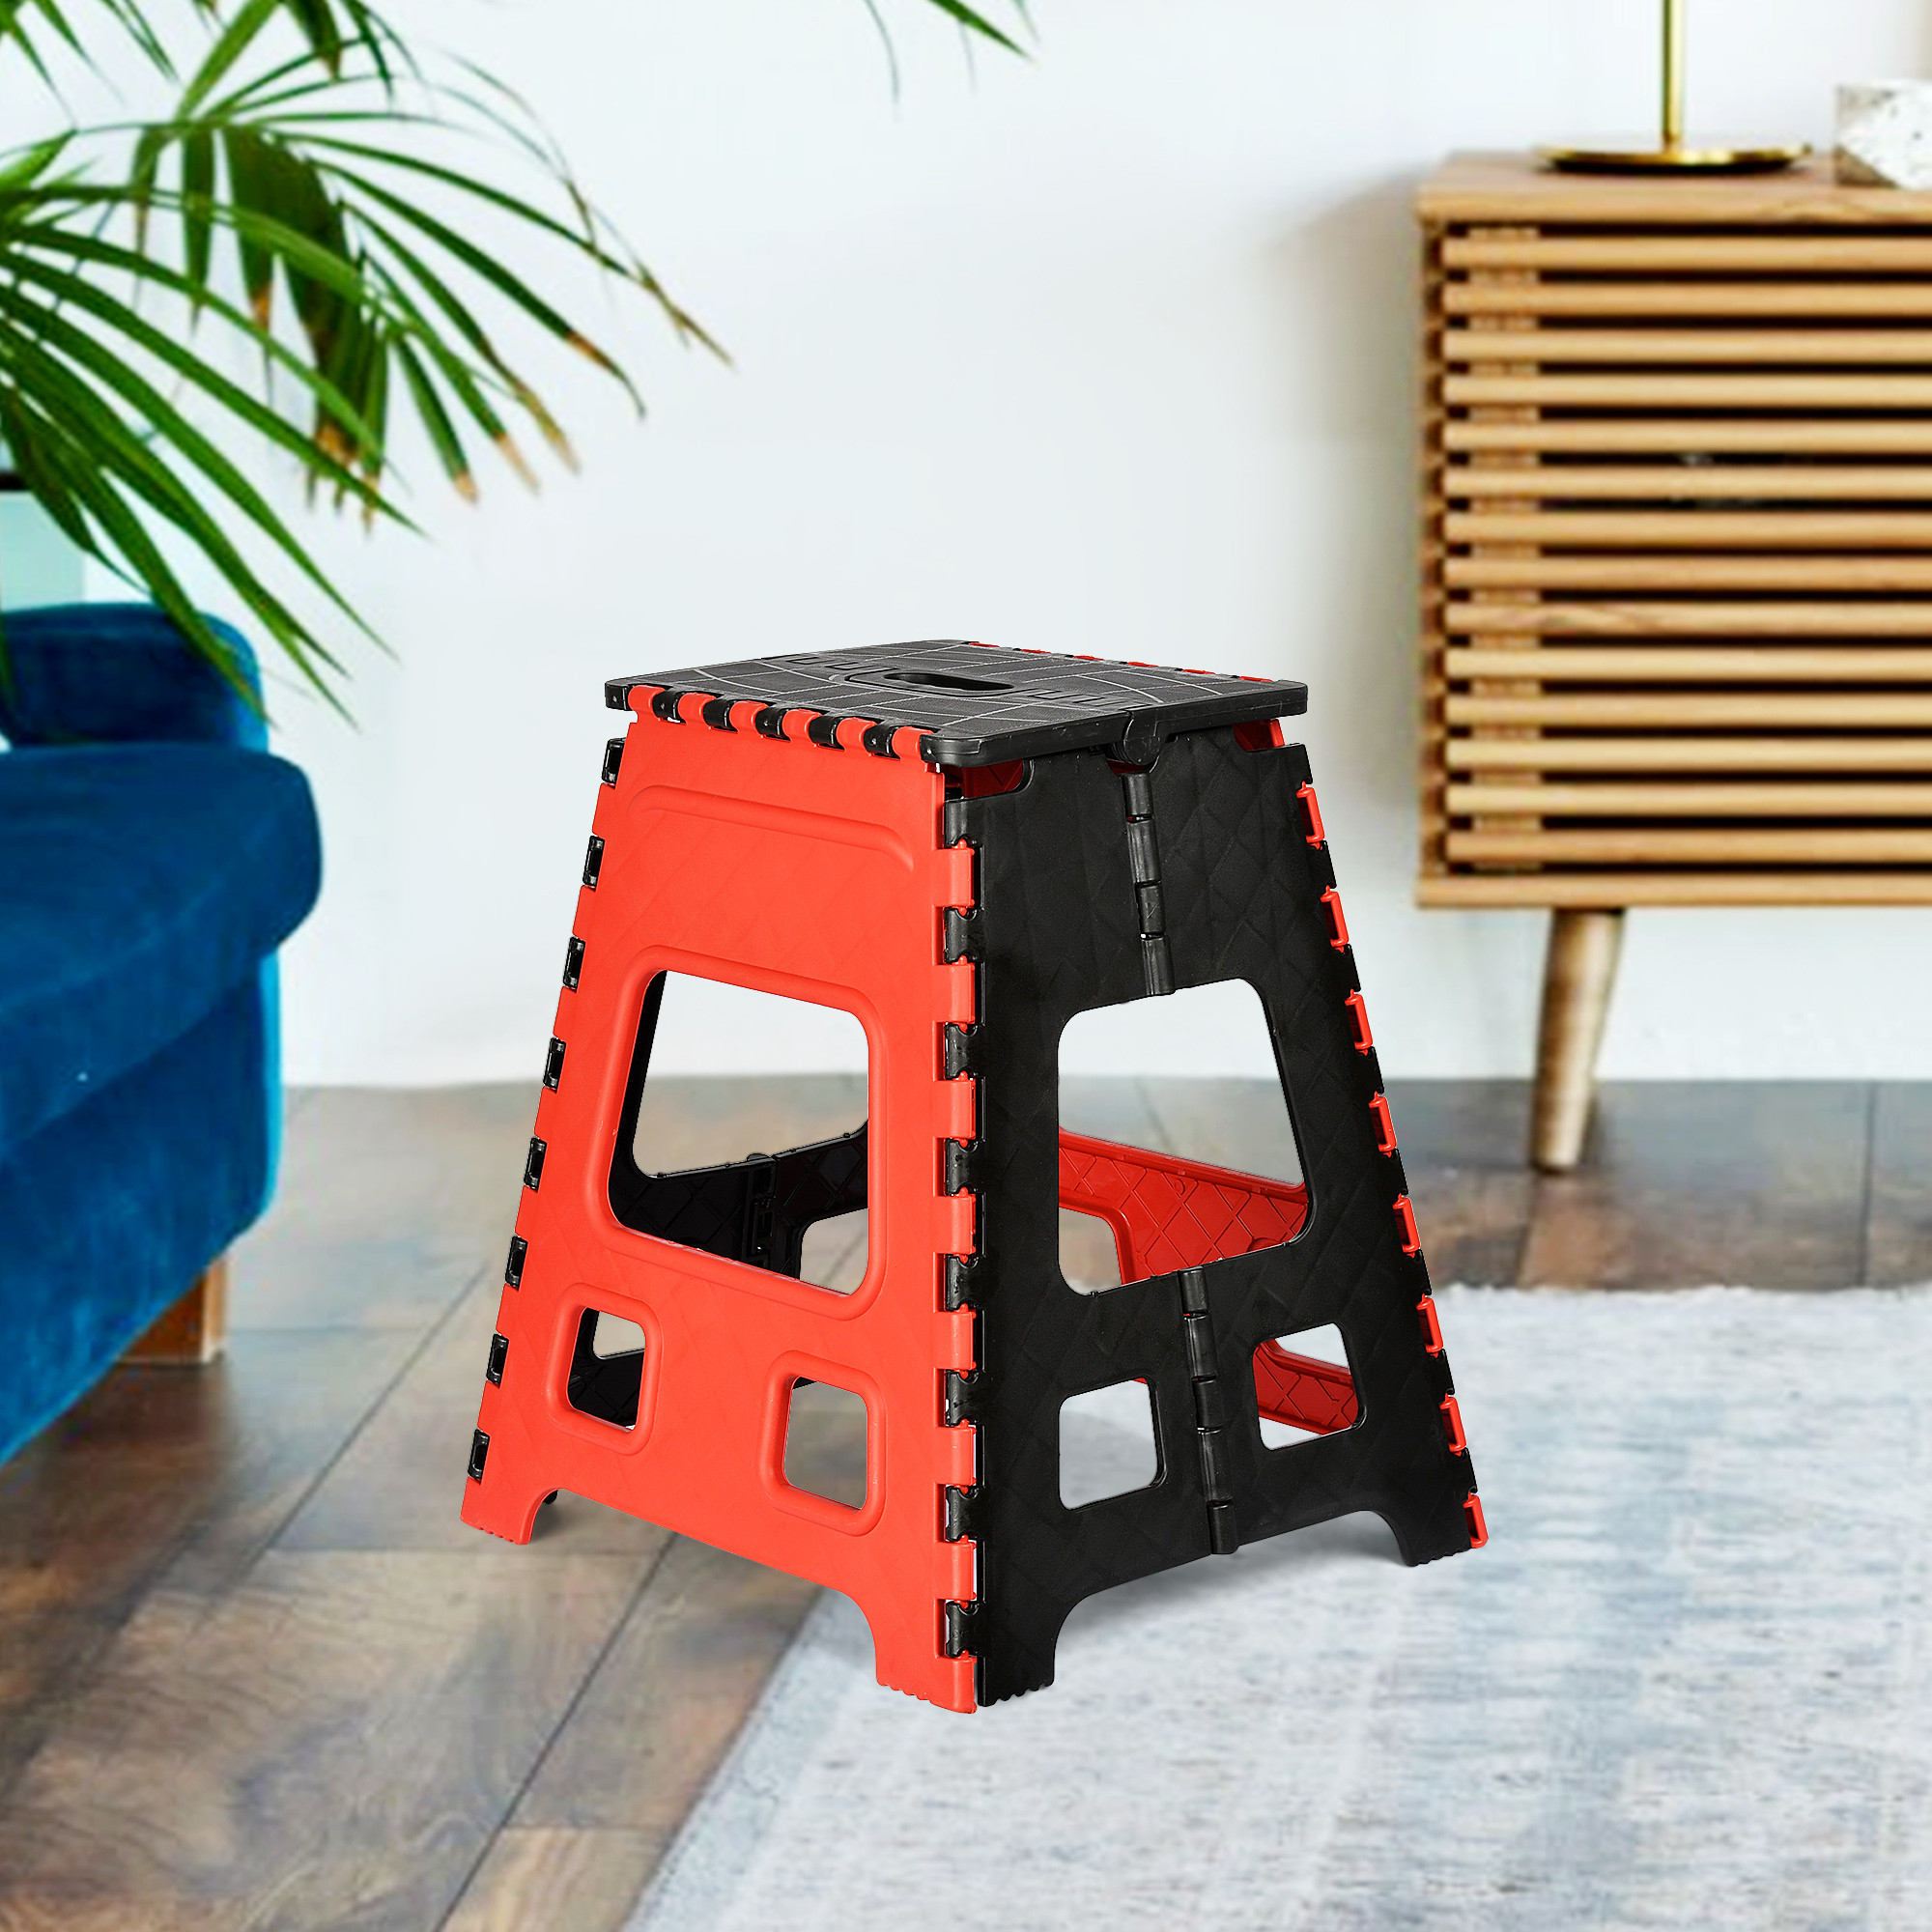 Kuber Industries Stool | Foldable Stool | Collapsible Camping Chair | Stool for Outdoor-Fishing-Hiking-Gardening-Travel | Portable Stool | Multipurpose Sitting Stool | Large | Red & Black